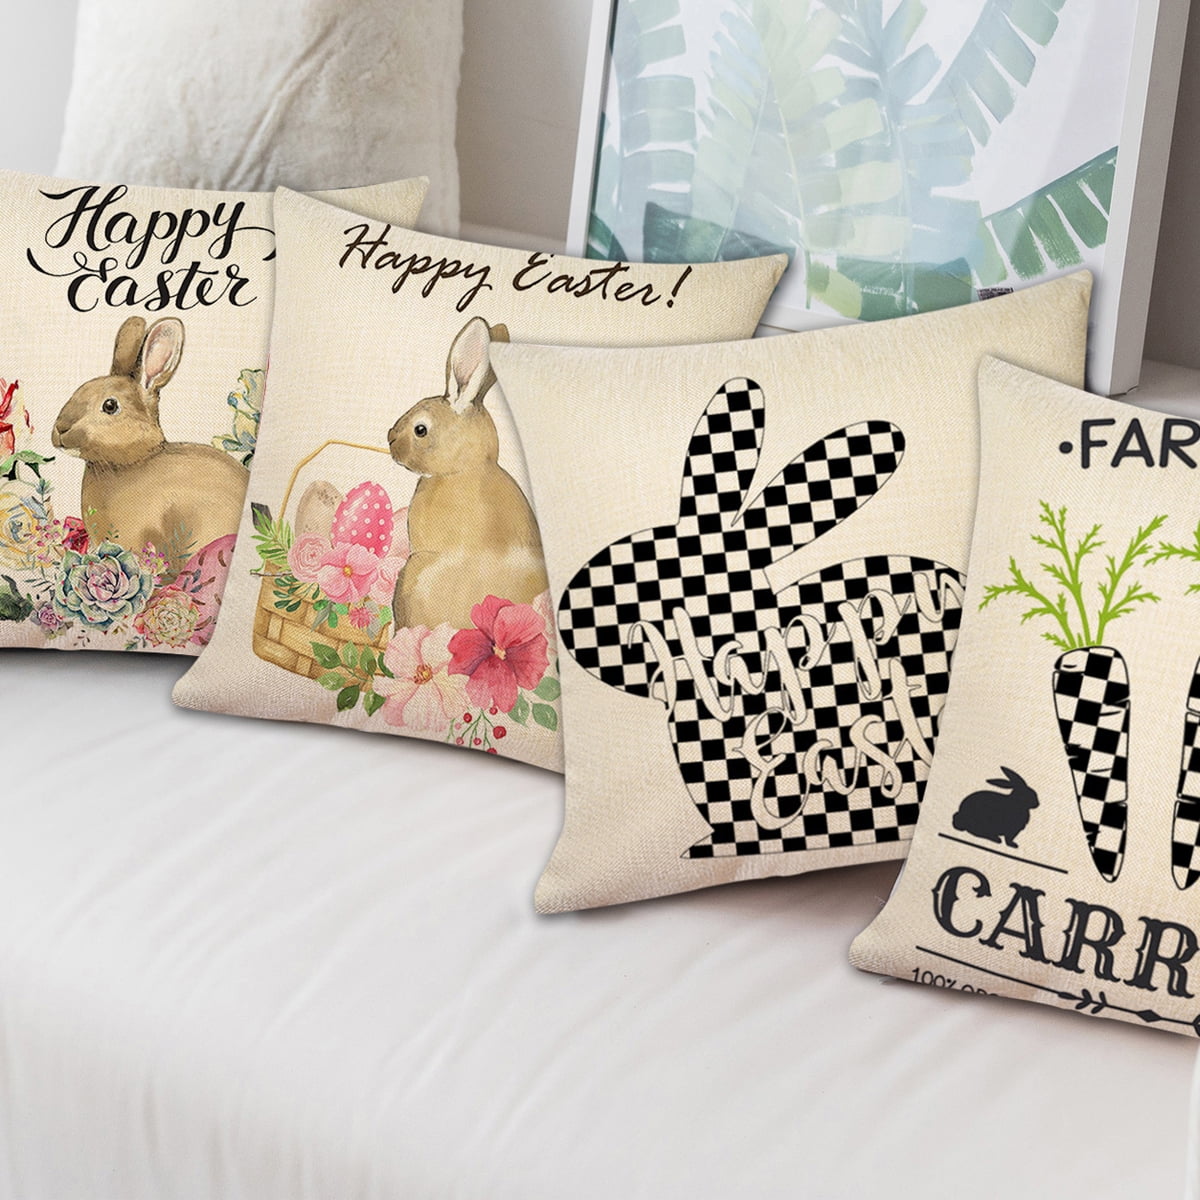 Happy Easter Colored Egg in The Basket Bunny Rabbit Chick Green Grass Blessing Gift Cotton Linen Square Throw Waist Pillow Case Decorative Cushion Cover Pillowcase Sofa 18x 18 